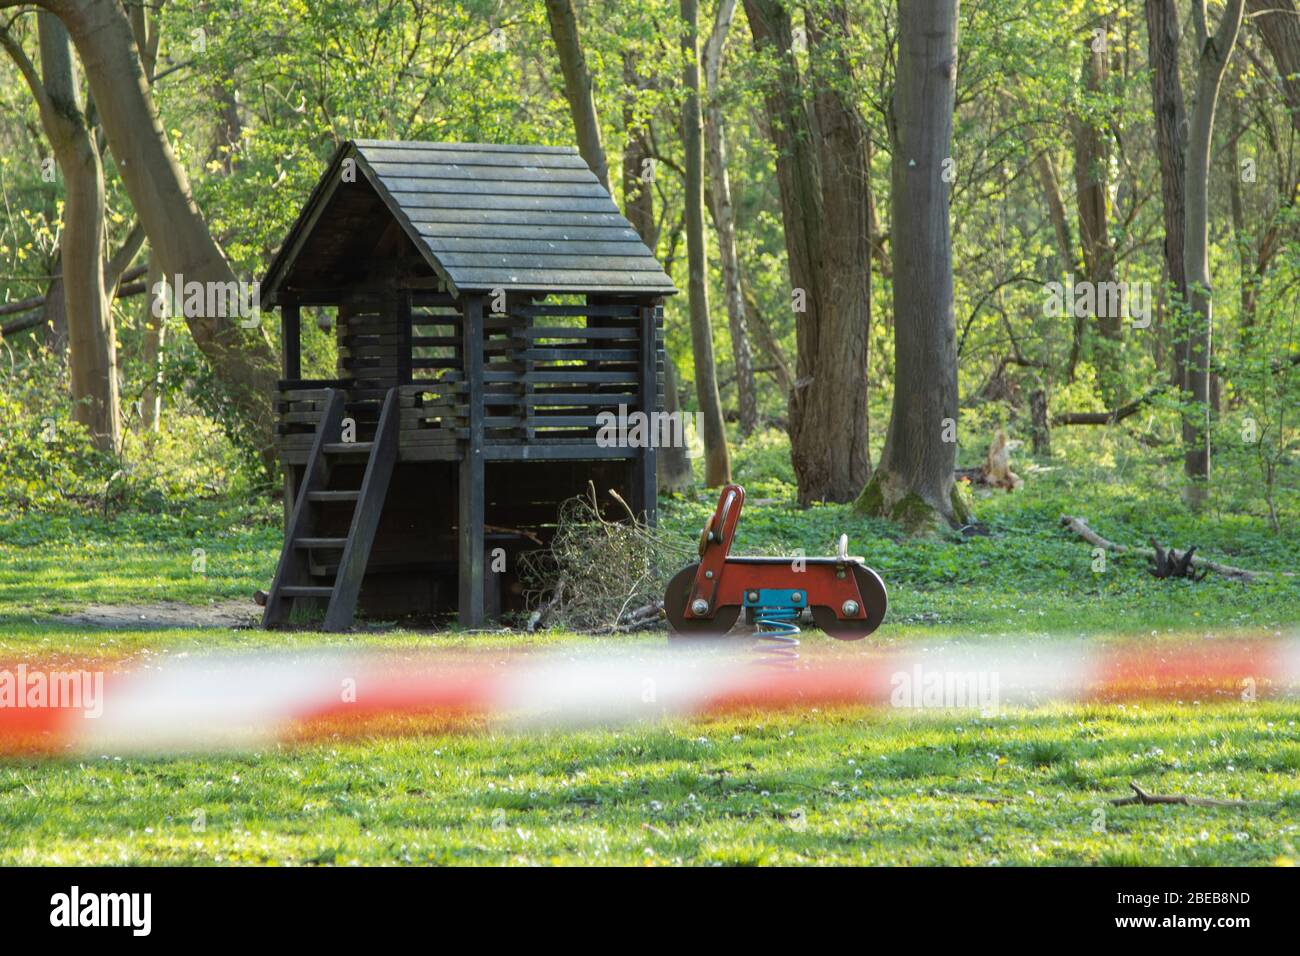 cordoned off playground, surroundet by trees, forcus on background, blurred barrier tape Stock Photo